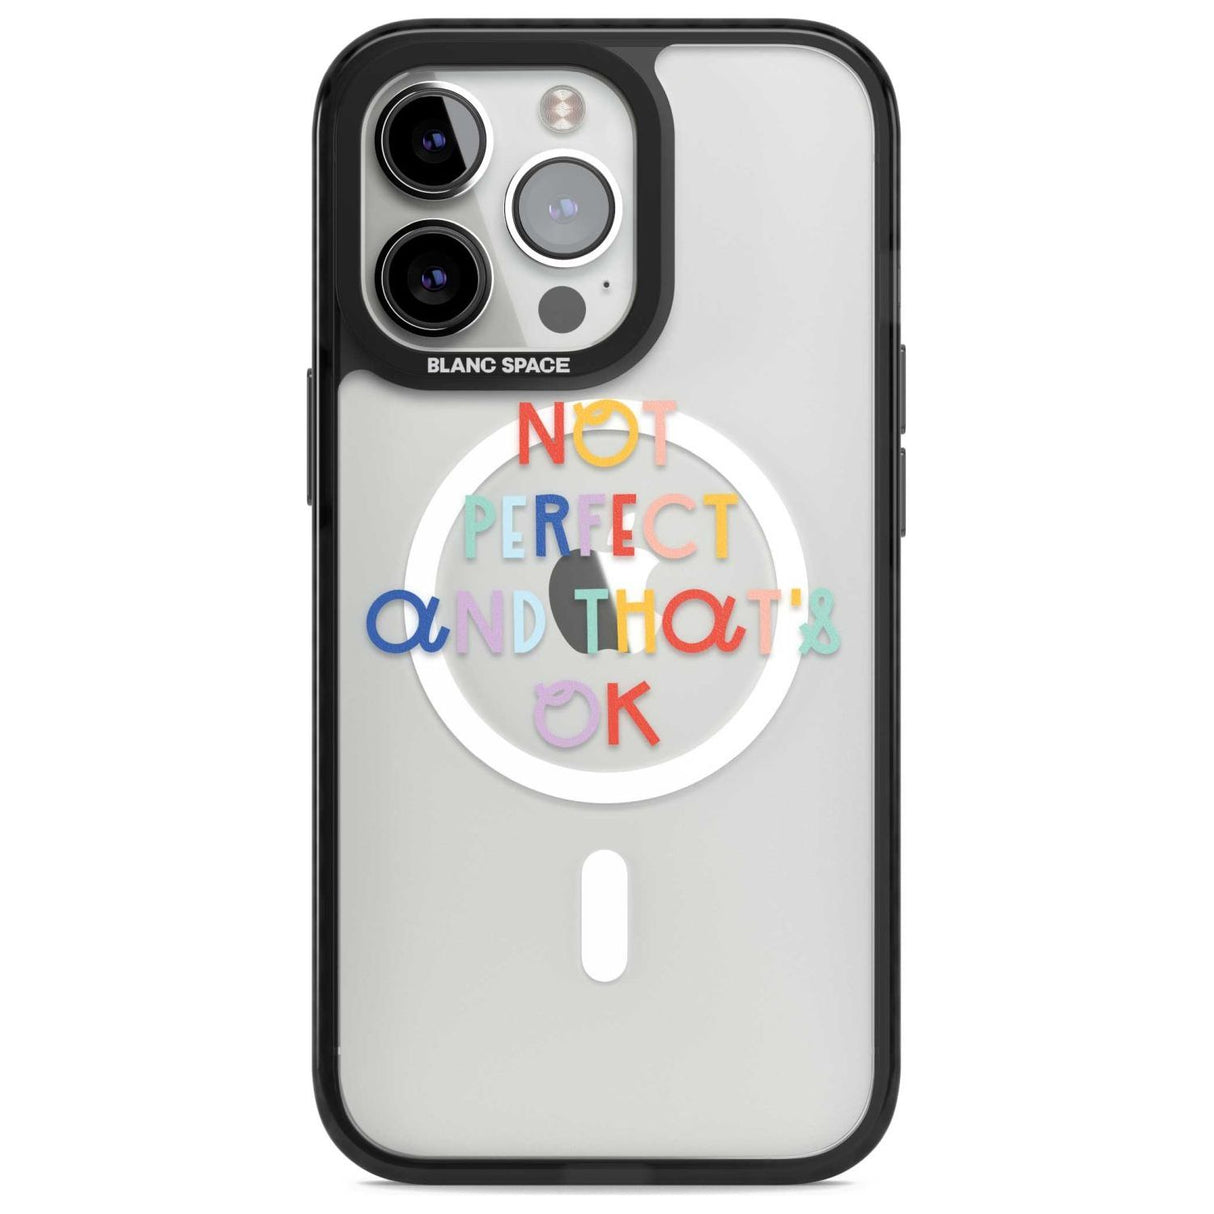 Not Perfect - Clear Phone Case iPhone 15 Pro Max / Magsafe Black Impact Case,iPhone 15 Pro / Magsafe Black Impact Case,iPhone 14 Pro Max / Magsafe Black Impact Case,iPhone 14 Pro / Magsafe Black Impact Case,iPhone 13 Pro / Magsafe Black Impact Case Blanc Space